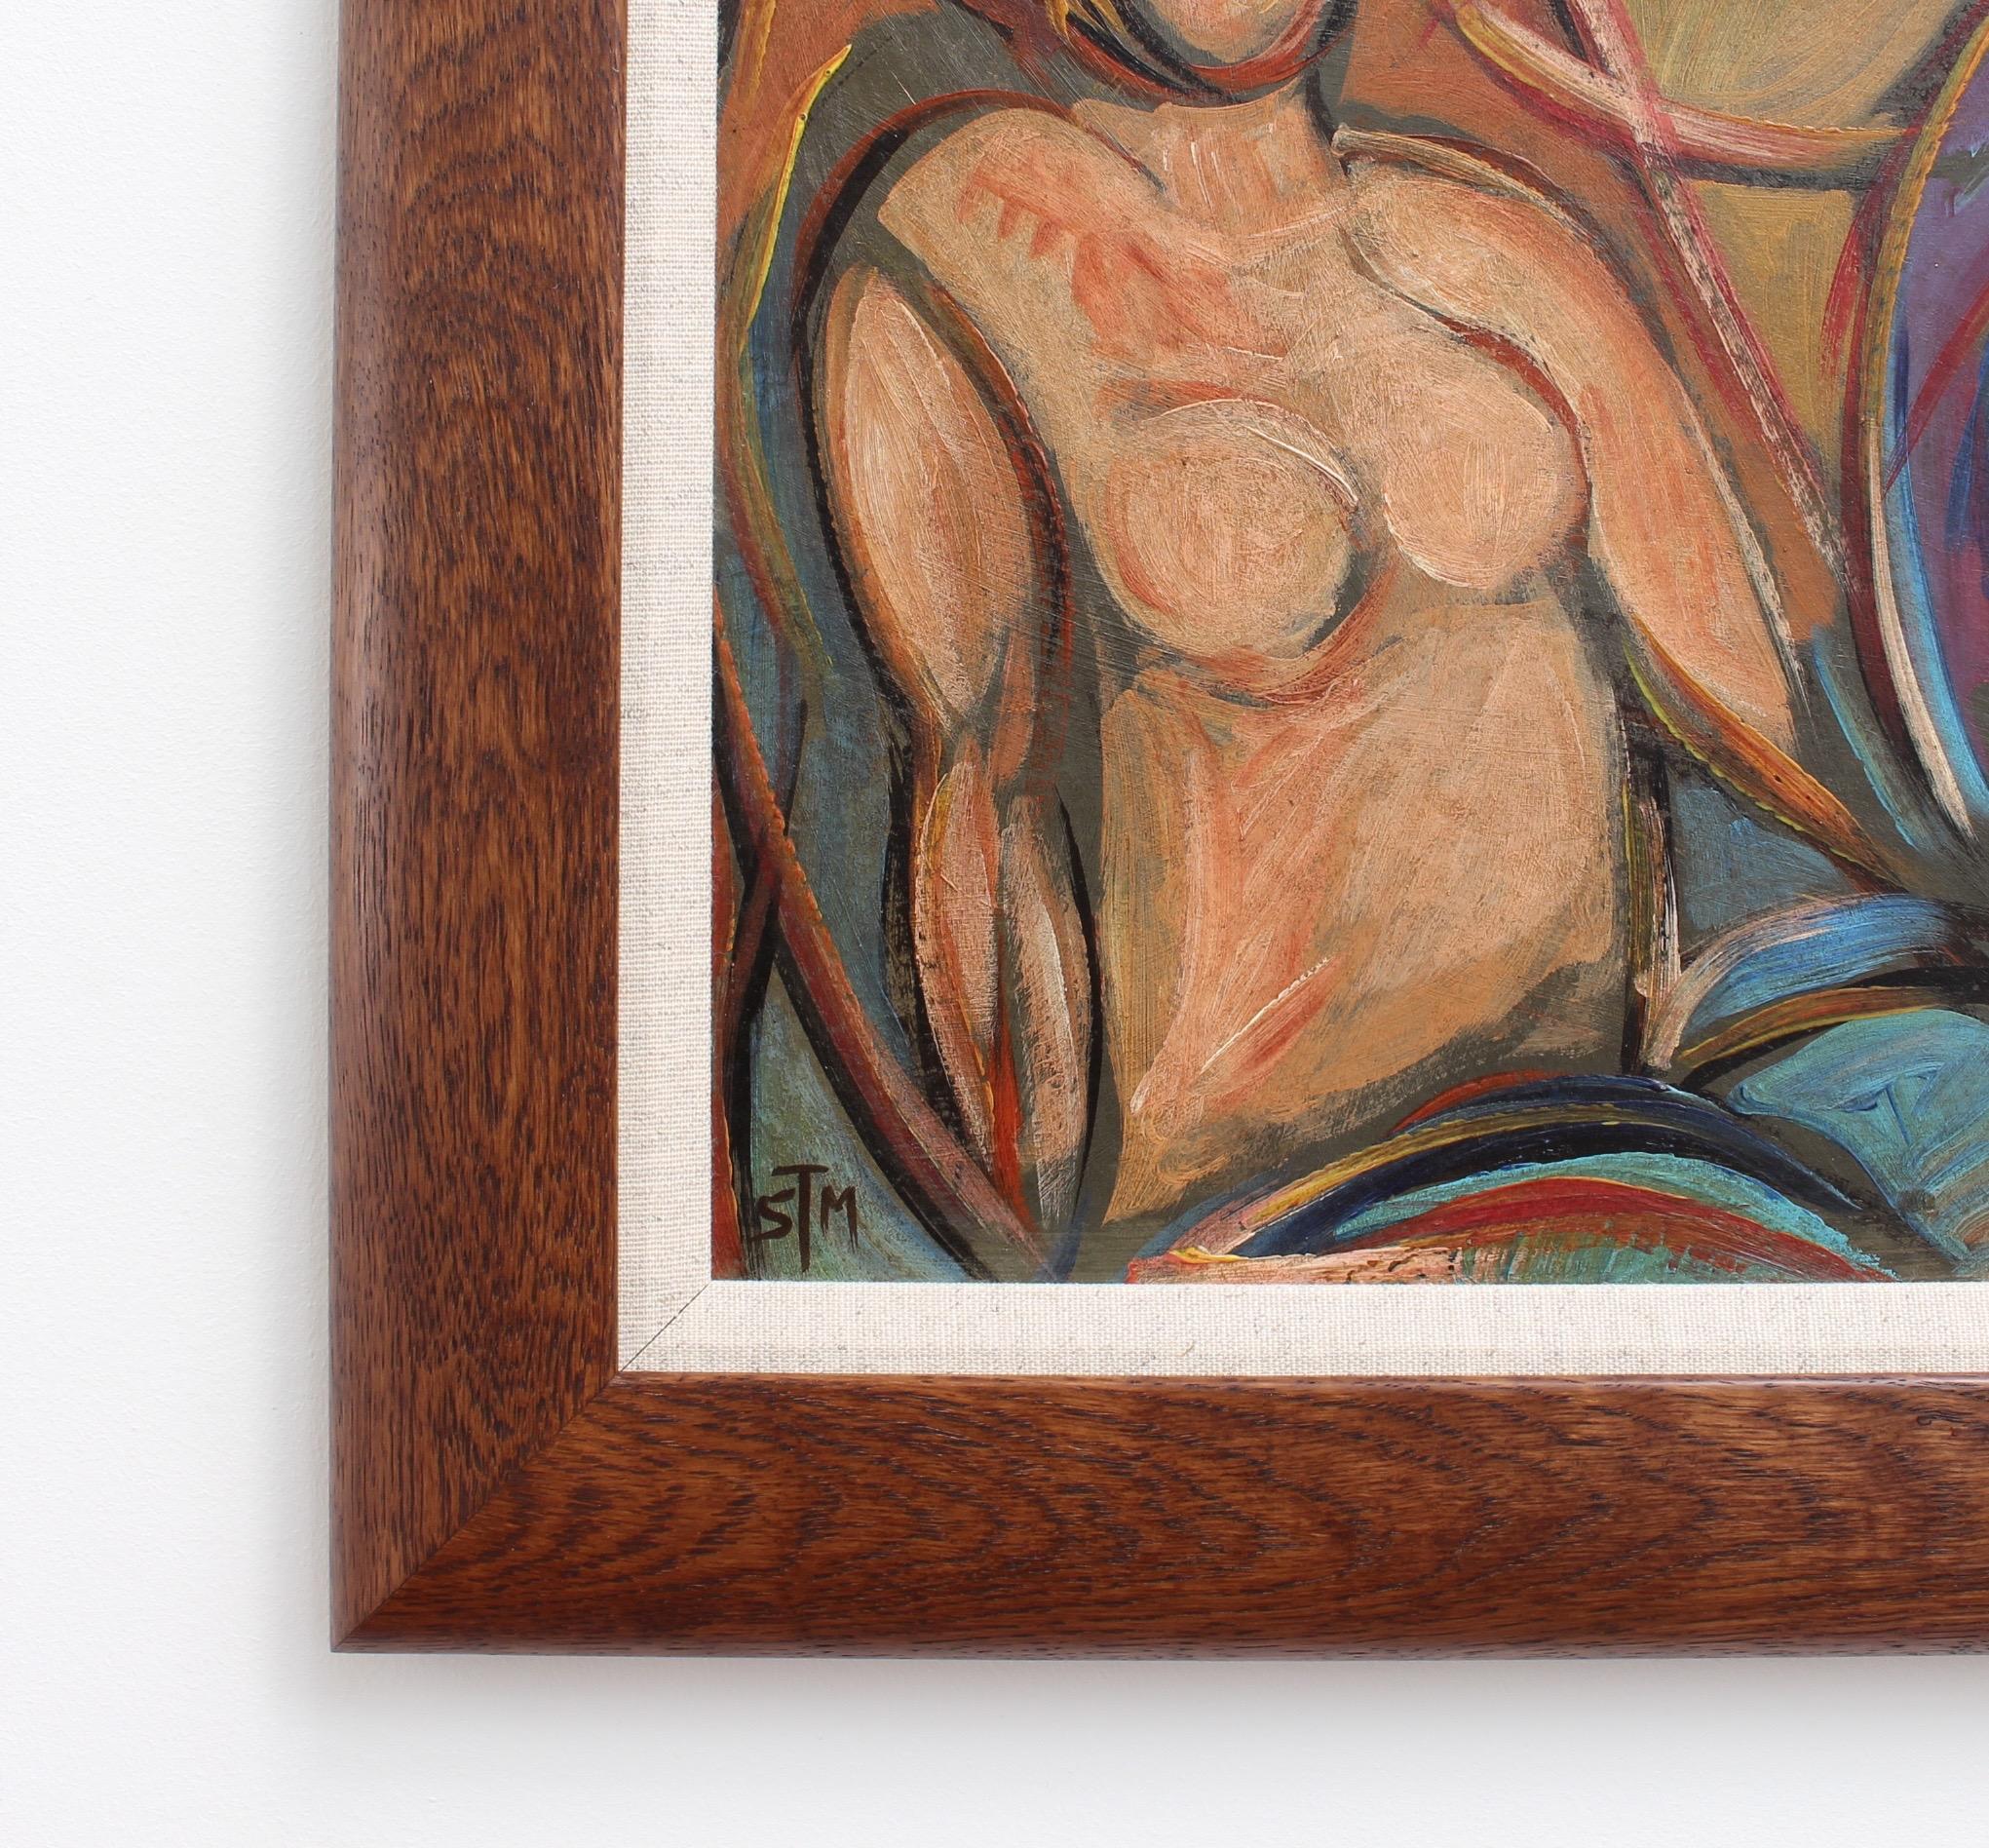 'Nudes in Repose' by STM, Mid-Century Modern Cubist Portrait Painting, Berlin 8